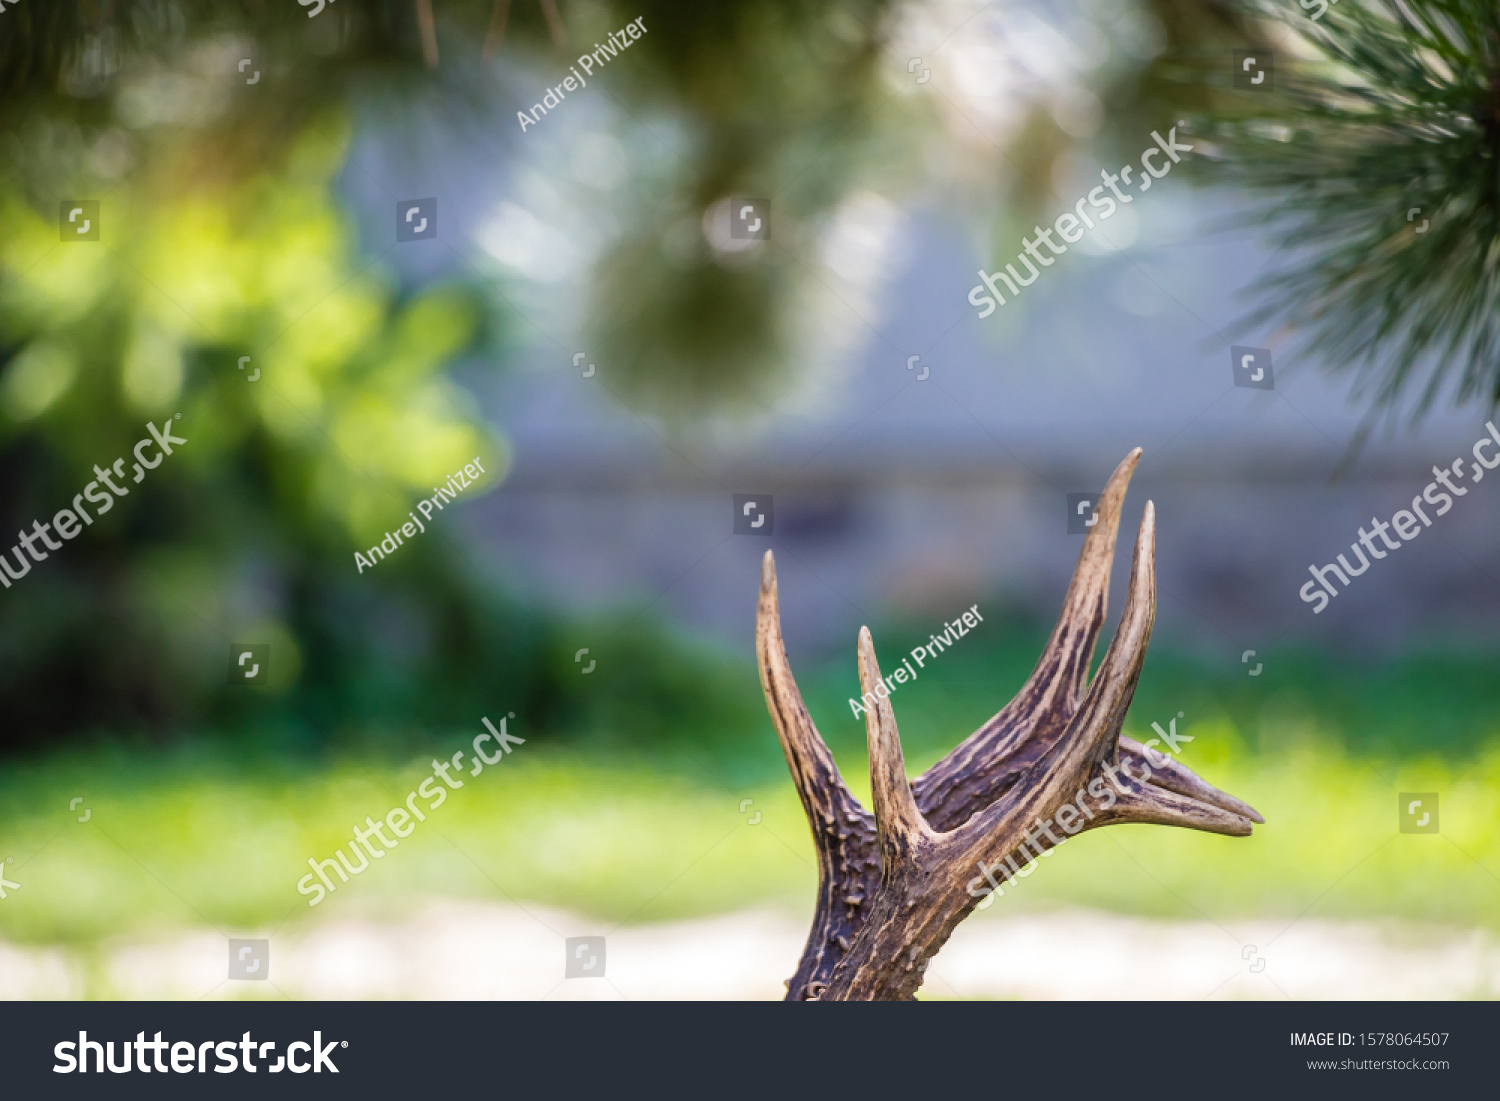 Close up shot of a deer antlers, selective focus, blurred background #1578064507